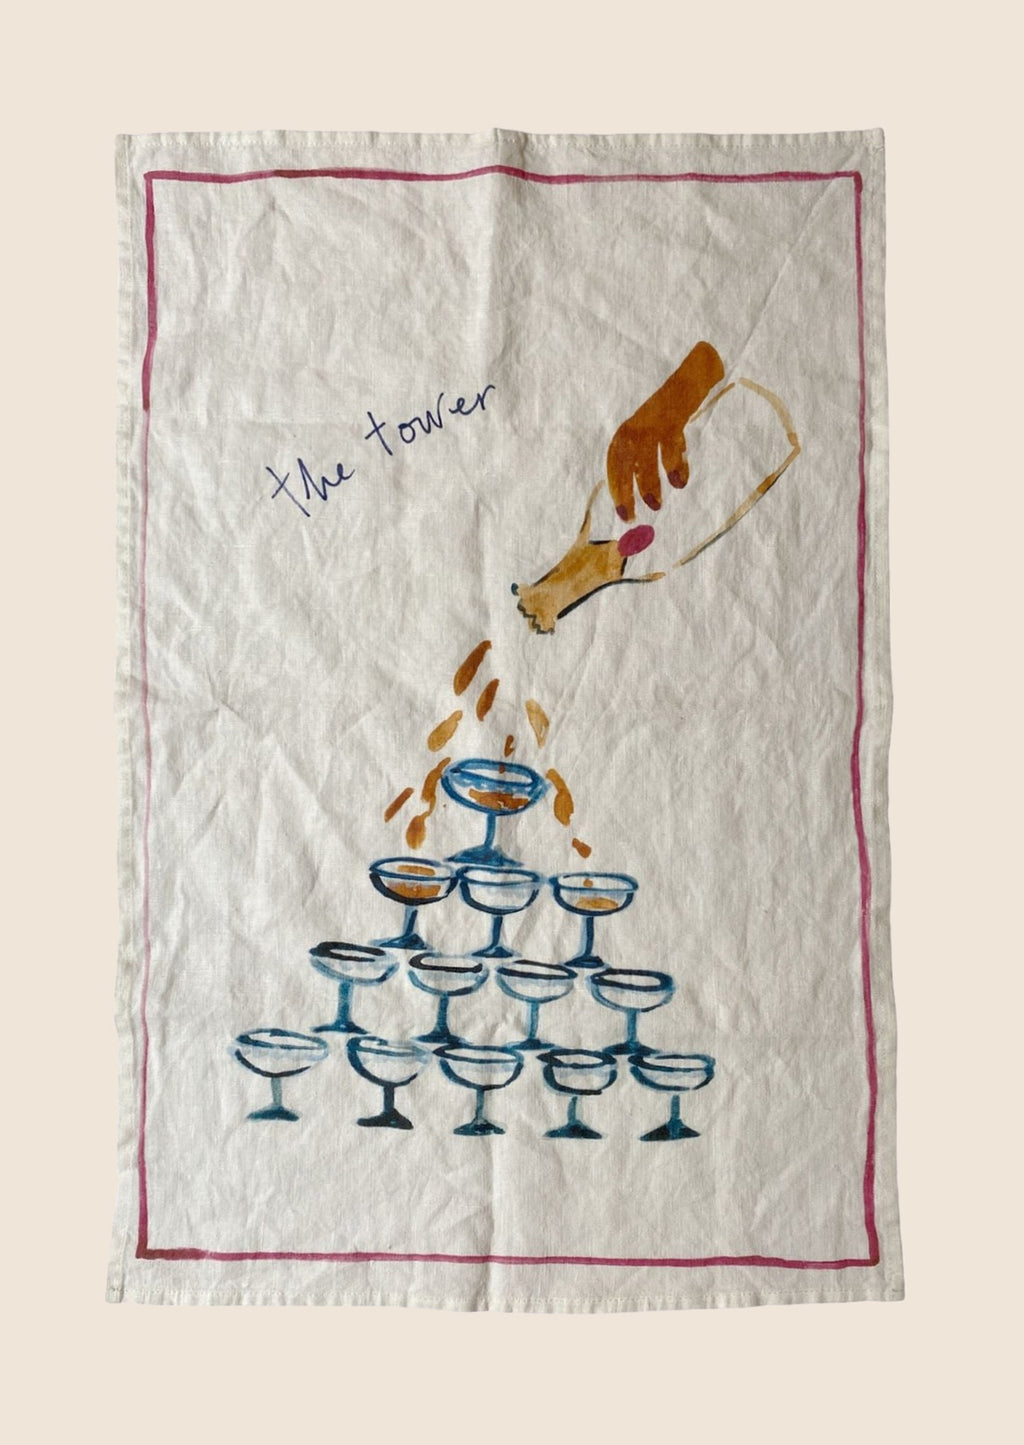 The Tower: A white linen tea towel with martini tower graphic and text.